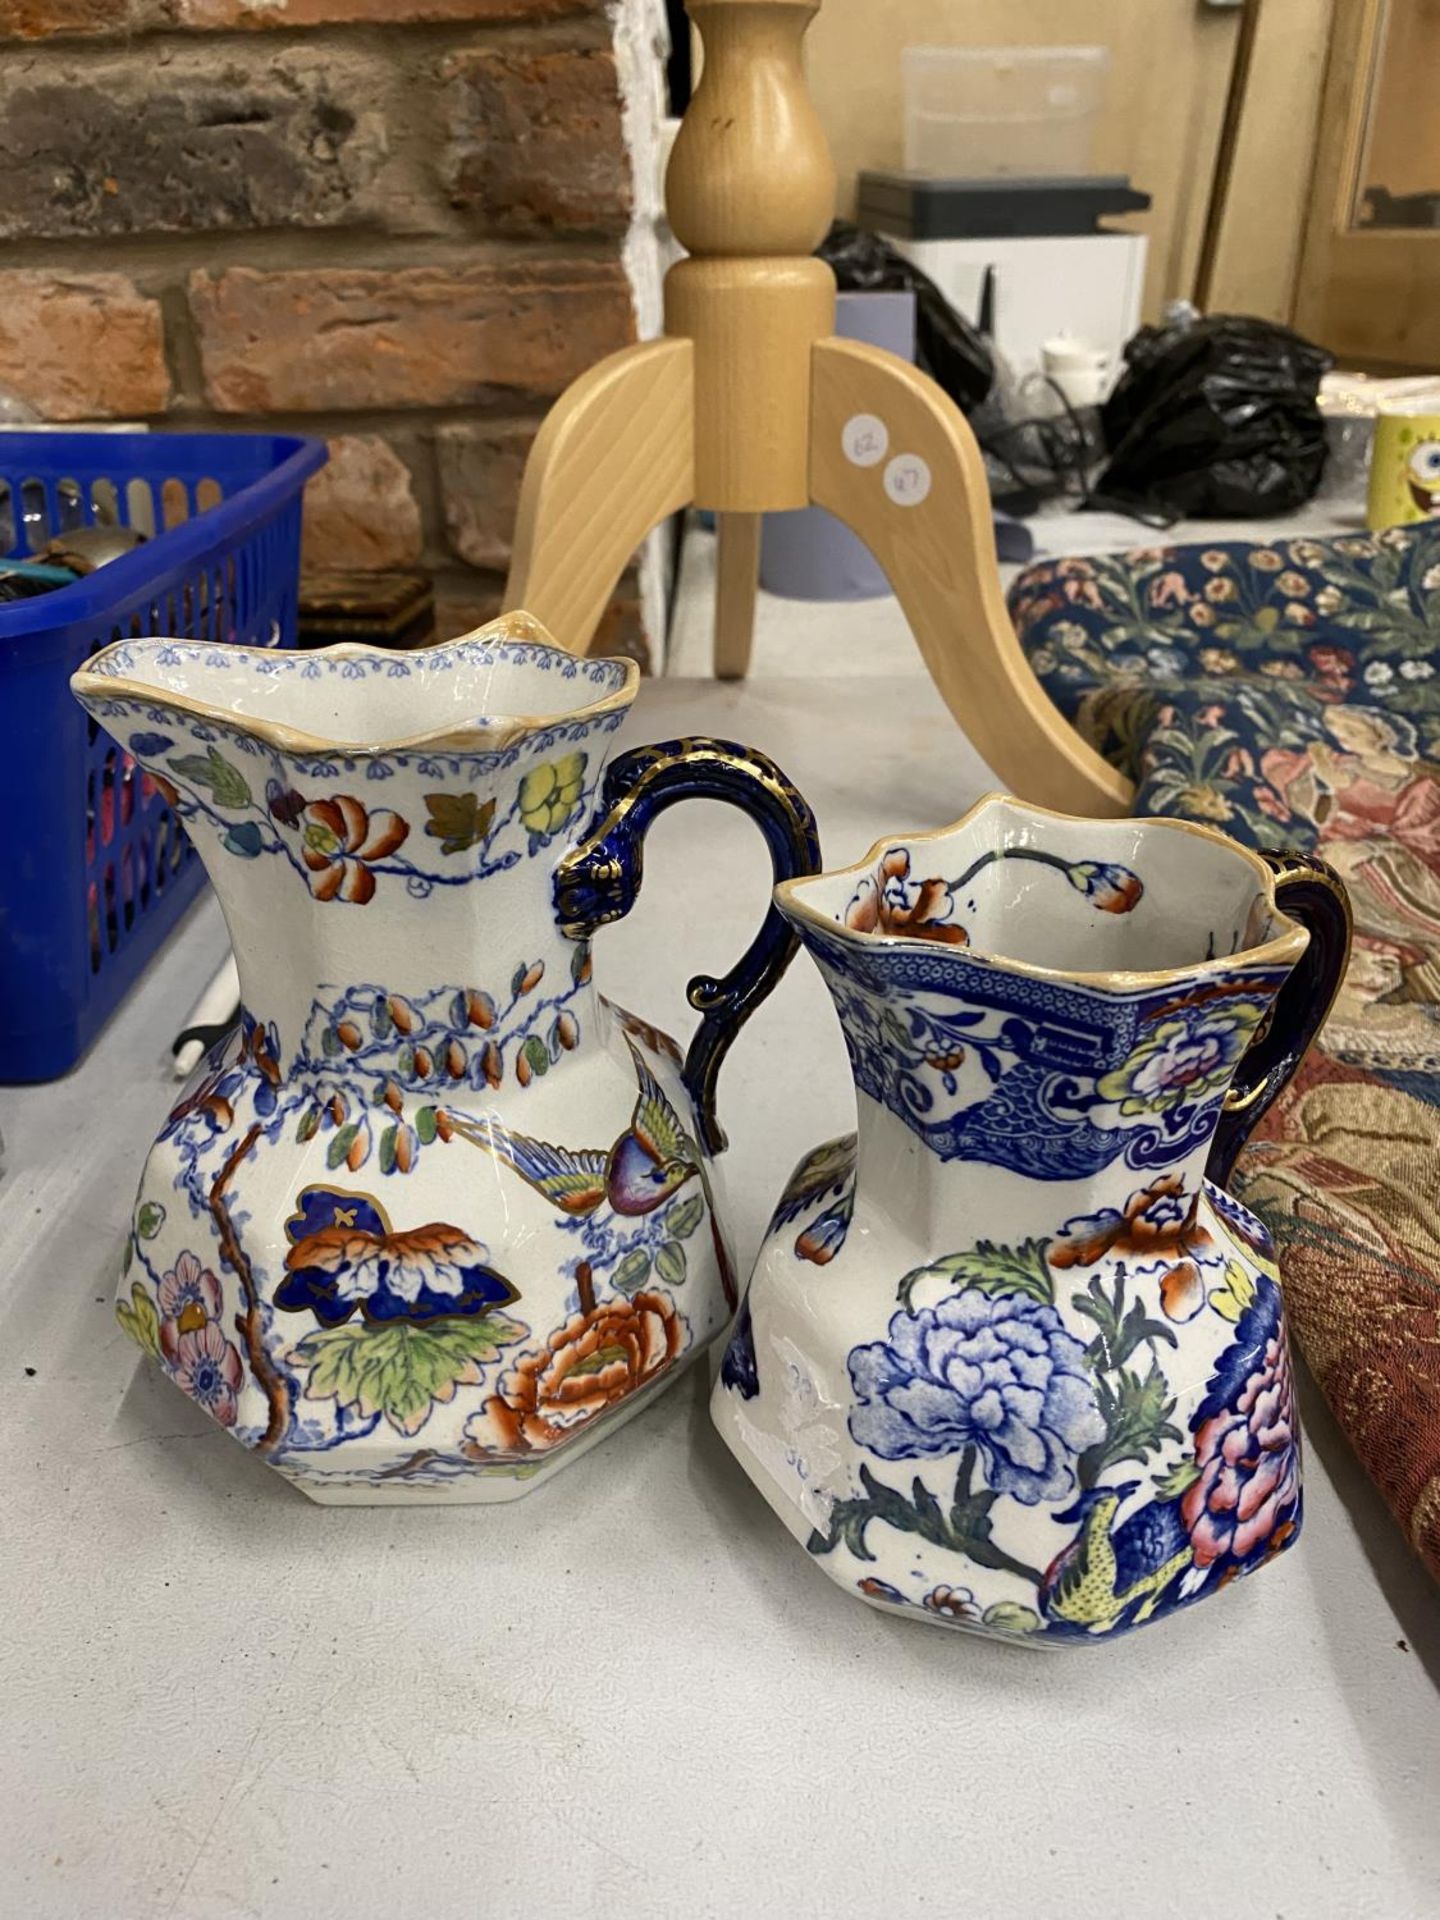 TWO MASONS IRONSTONE JUGS IN GOOD CONDITION